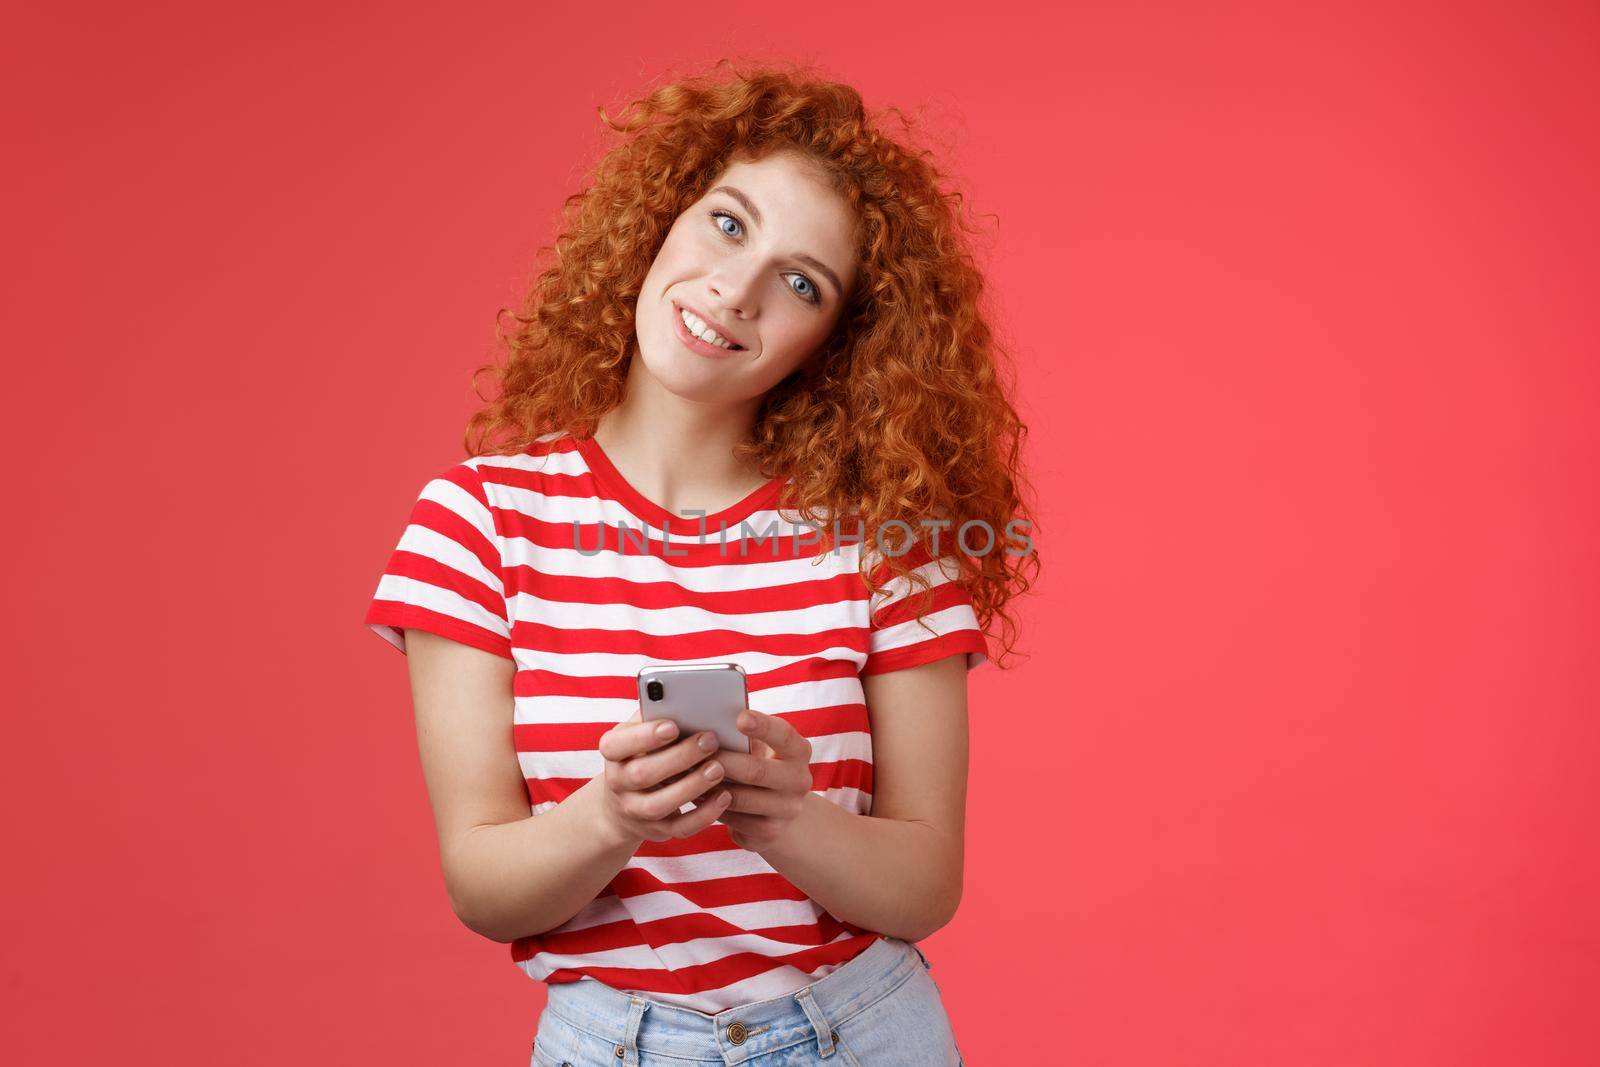 Silly cute redhead curly-haired fashionable female hold smartphone tilt head smiling broadly toothy positive grin pondering what answer send provocative sassy message red background.